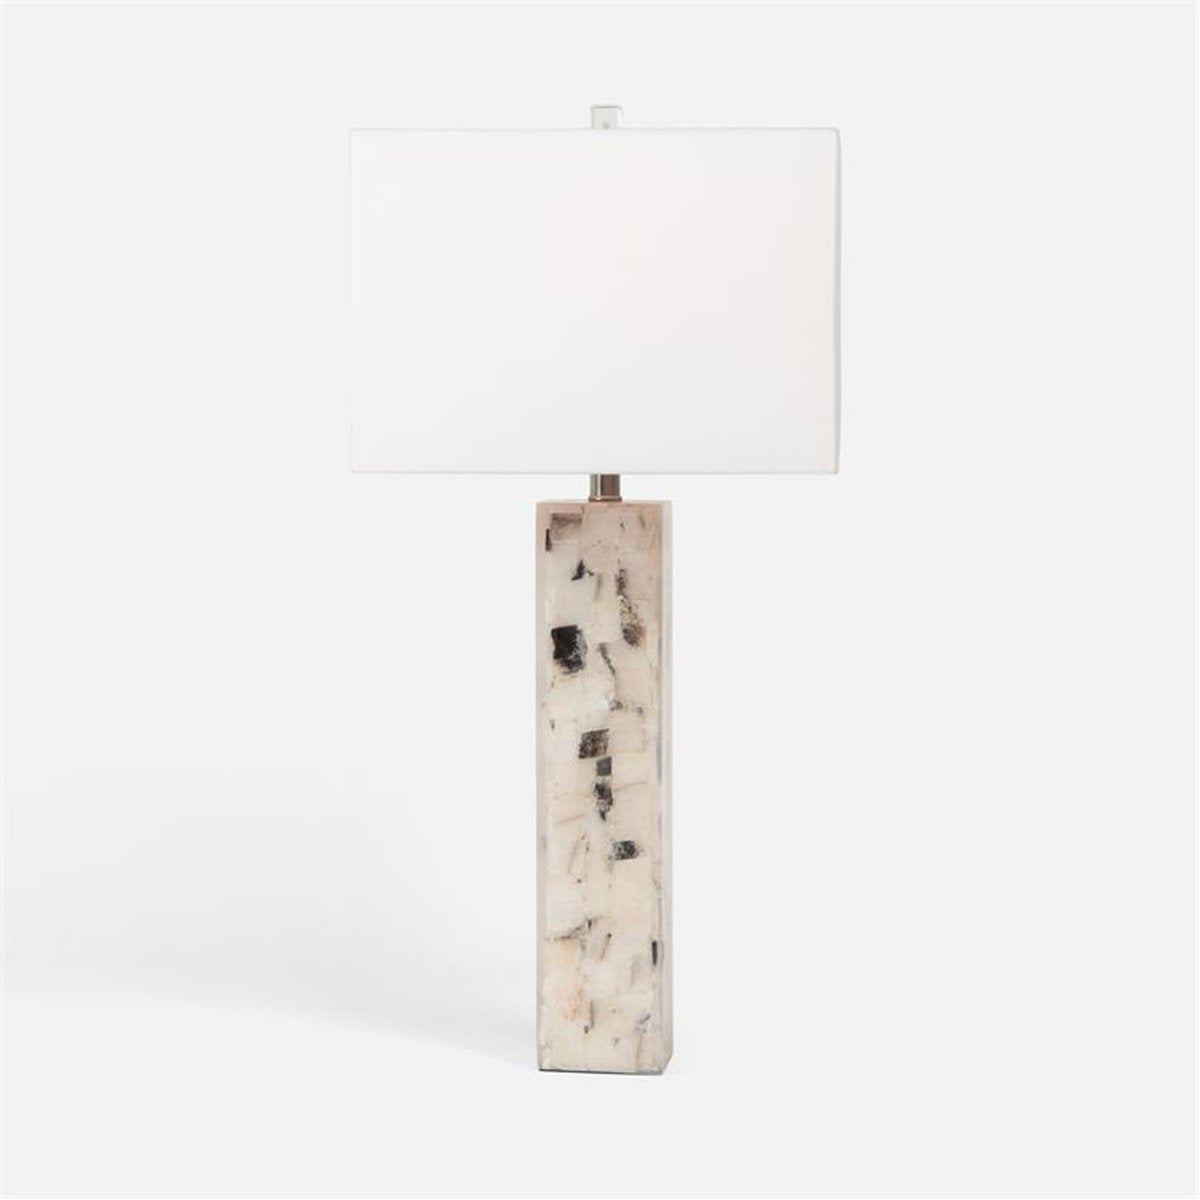 Made Goods Shawn Calcite Stone Table Lamp